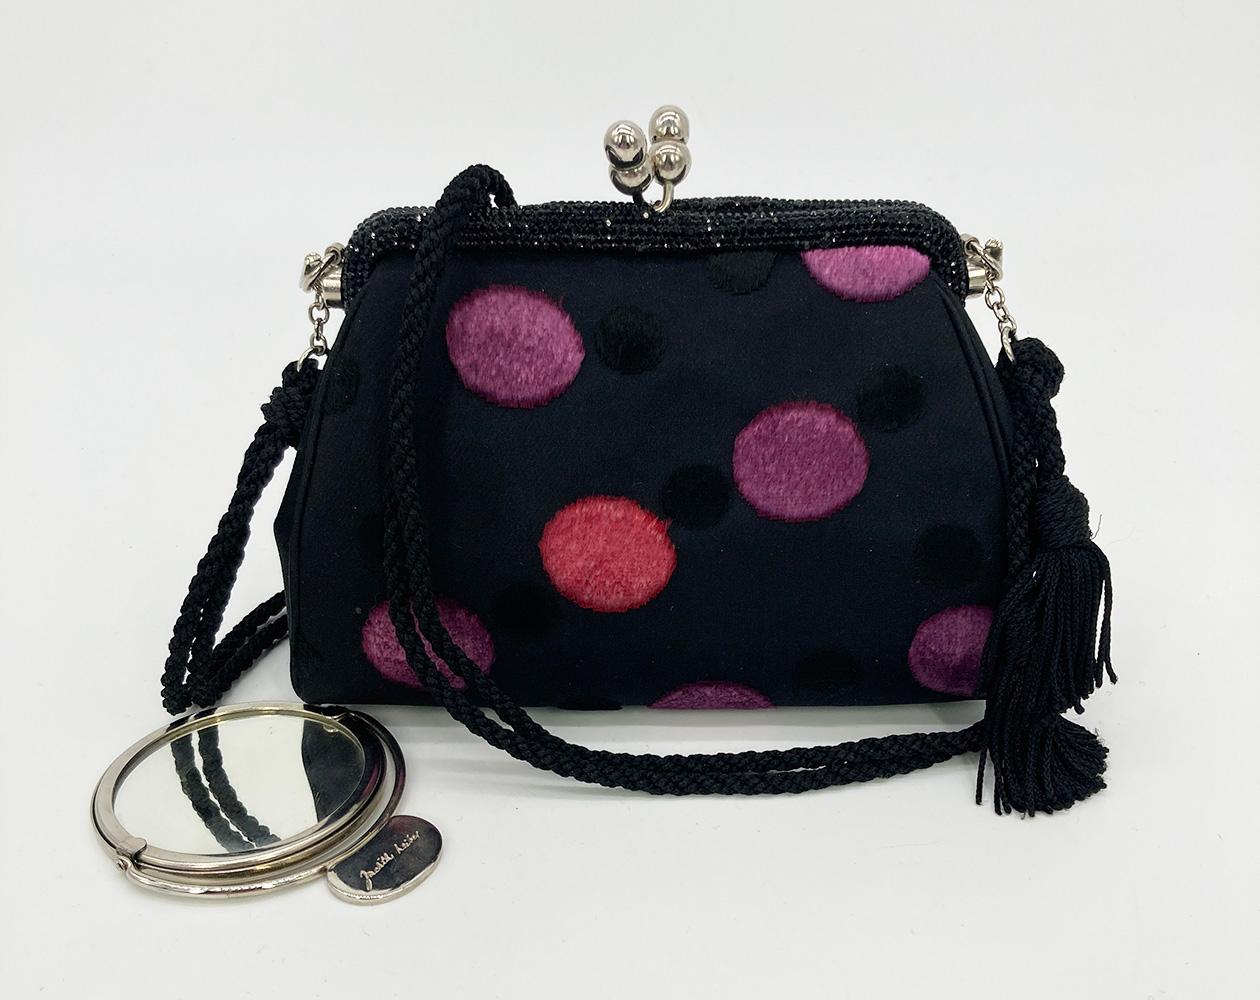 Judith Leiber Black Silk Velvet Polka Dot Crystal Top Clutch in excellent condition. Black silk with purple pink and black velvet polka dot pattern trimmed with silver hardware and black swarovski crystals. Top kiss lock closure opens to a black